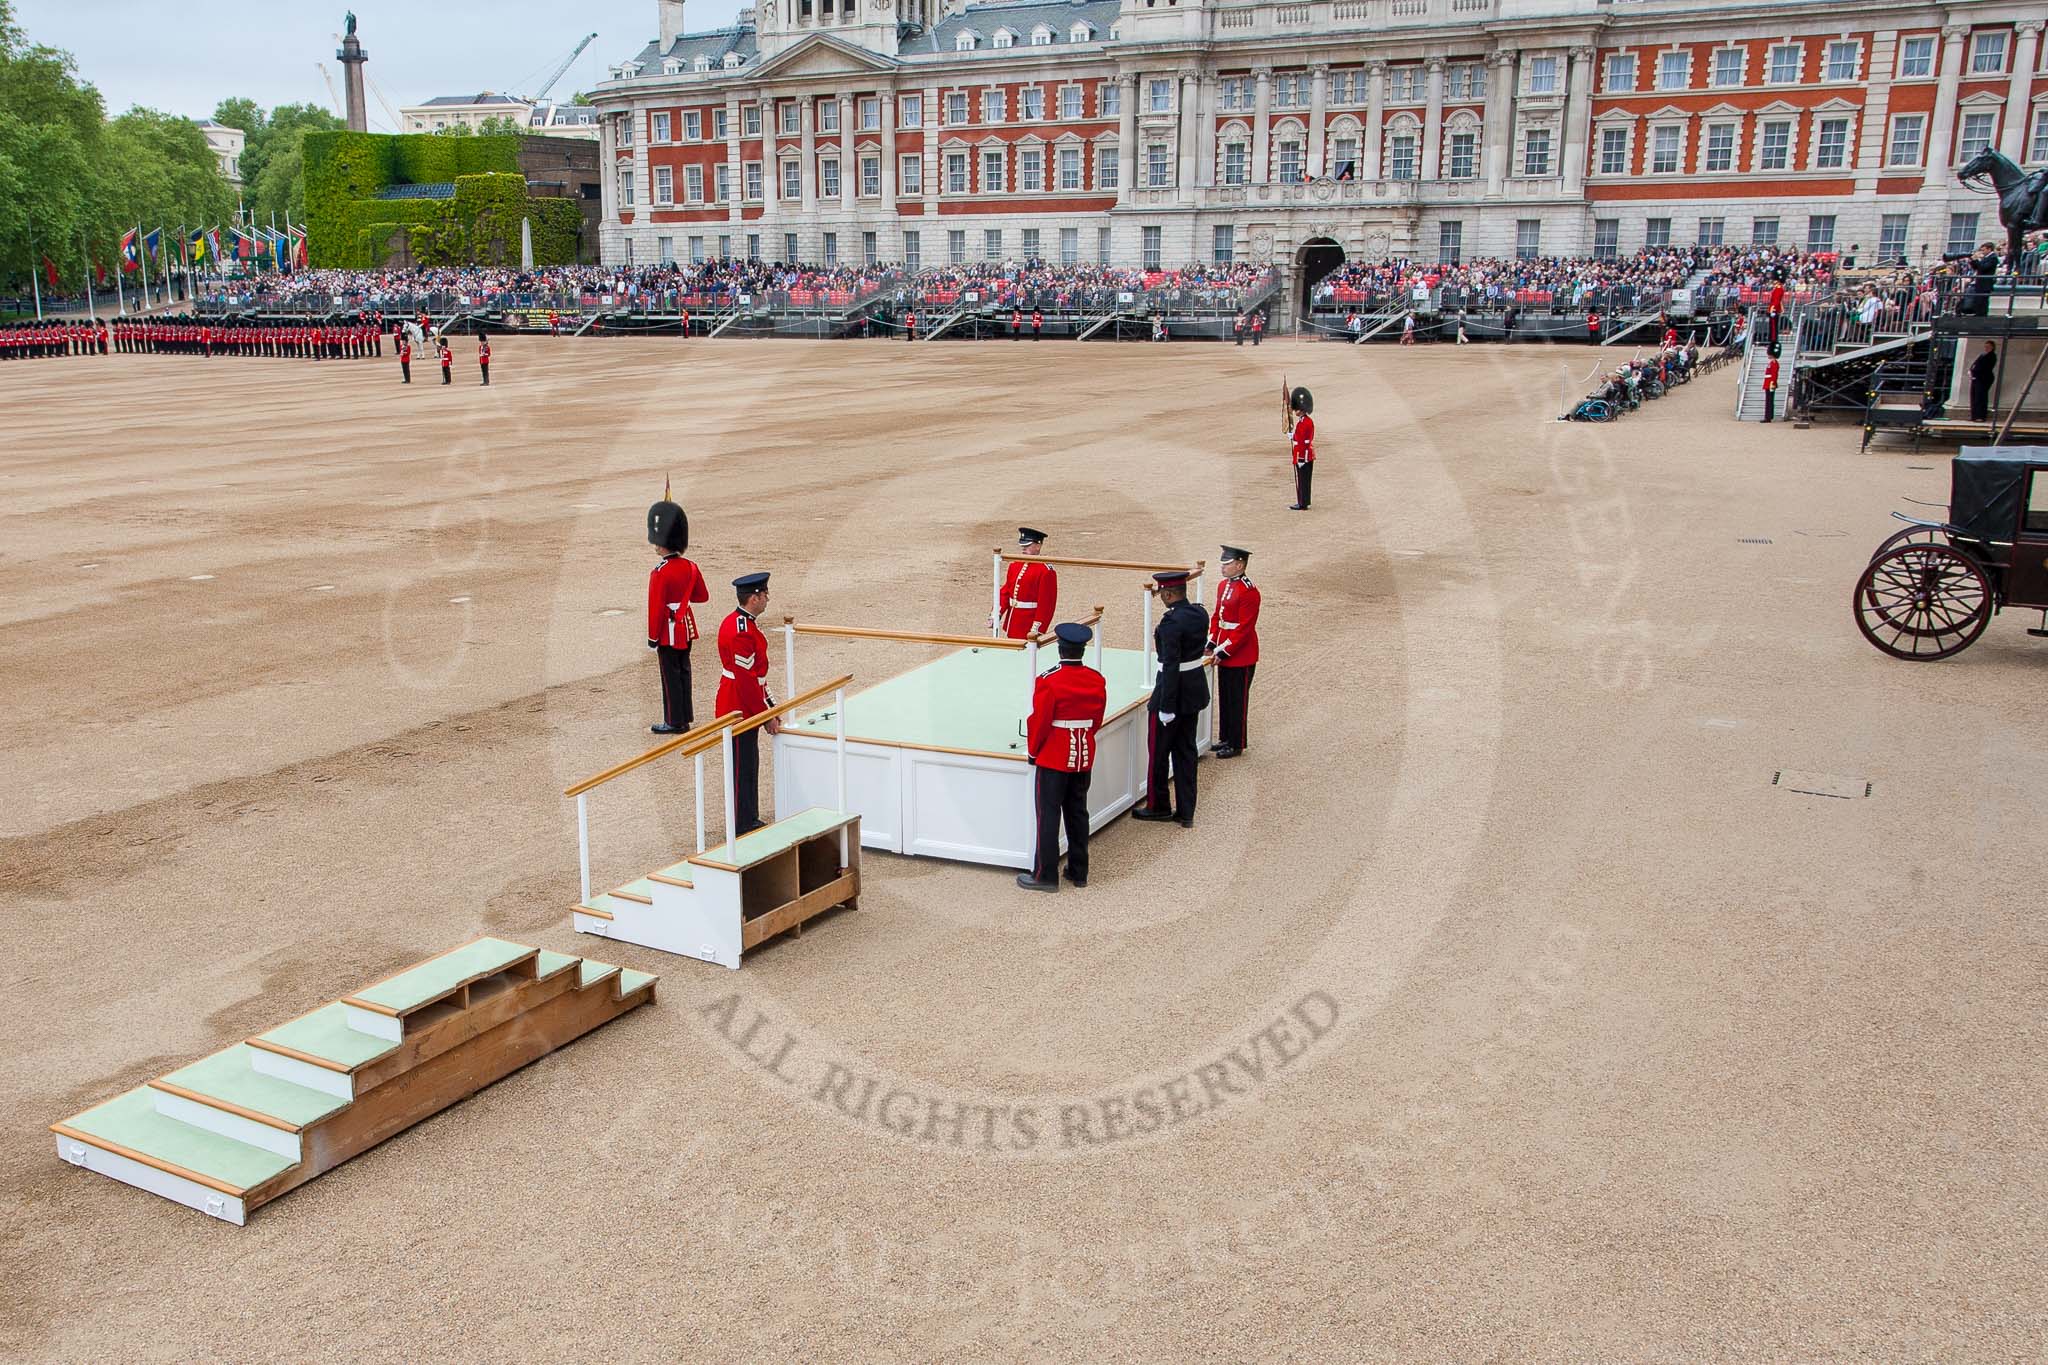 Major General's Review 2013: The dais, the saluting platform for HM The Queen, is moved into place in front of Horse Guards Arch, after the carriages have passed..
Horse Guards Parade, Westminster,
London SW1,

United Kingdom,
on 01 June 2013 at 10:52, image #210